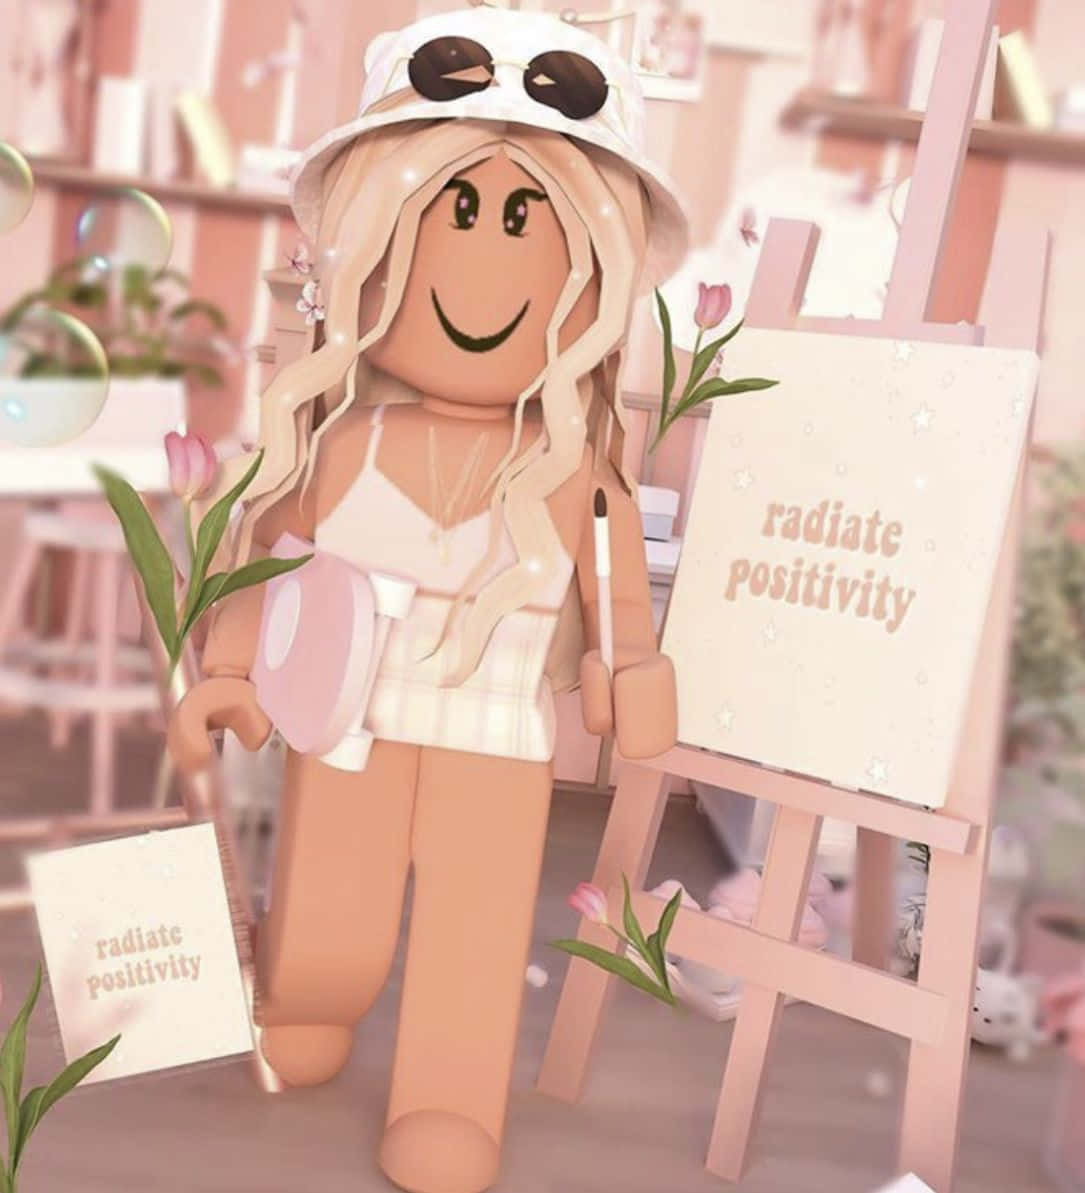 Aesthetic Roblox Outfit in Cherry Blossom Garden